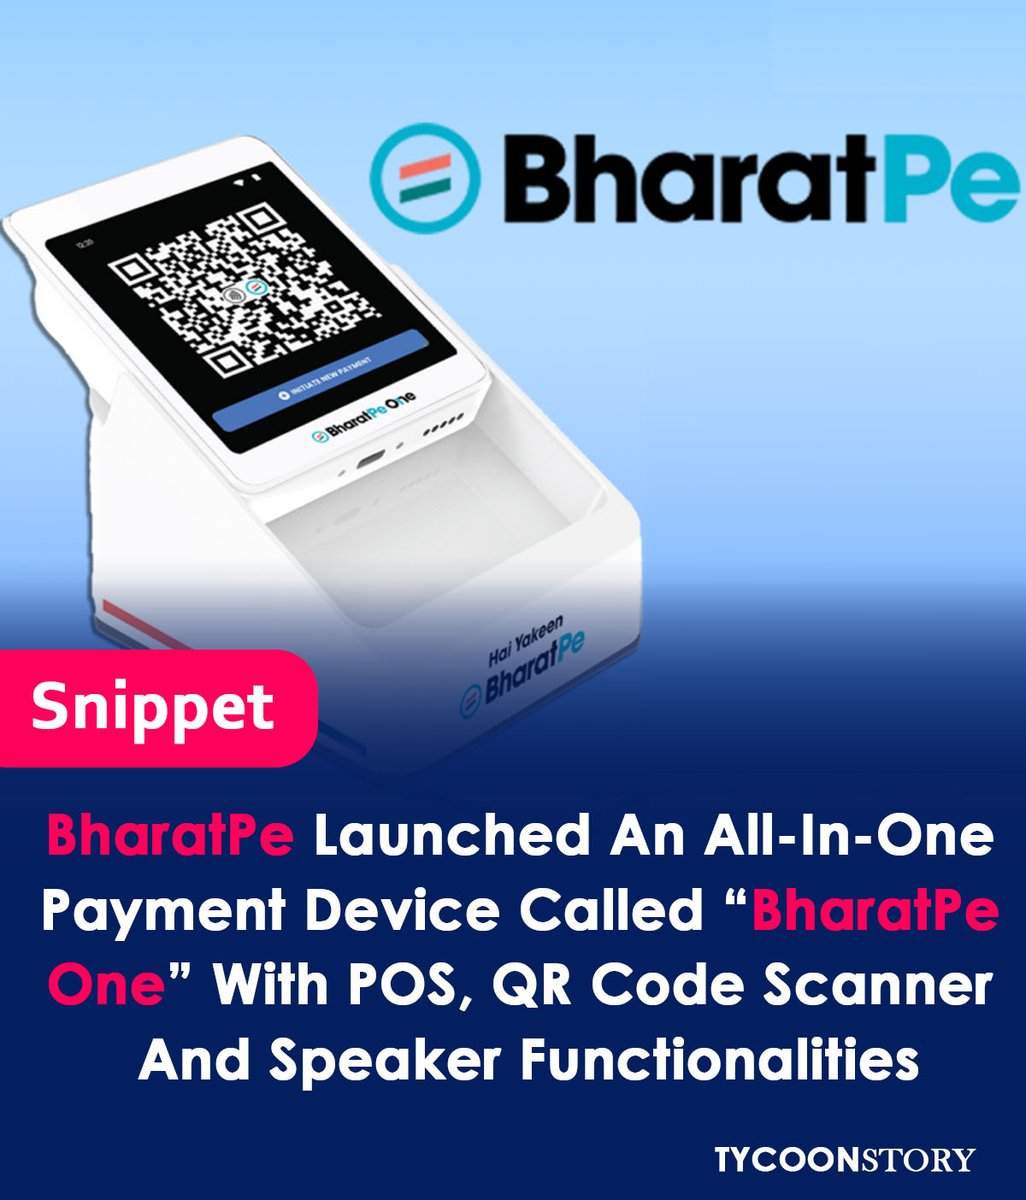 BharatPe launched an all-in-one payment device called BharatPe One
#BharatPeOne #AllInOnePayment #FintechInnovation #DigitalPayments #PoSsystem #QRcodePayments #SMEgrowth #CashlessTransactions #Convenience #MadeInIndia #FinancialInclusion #DigitalIndia @bharatpeindia